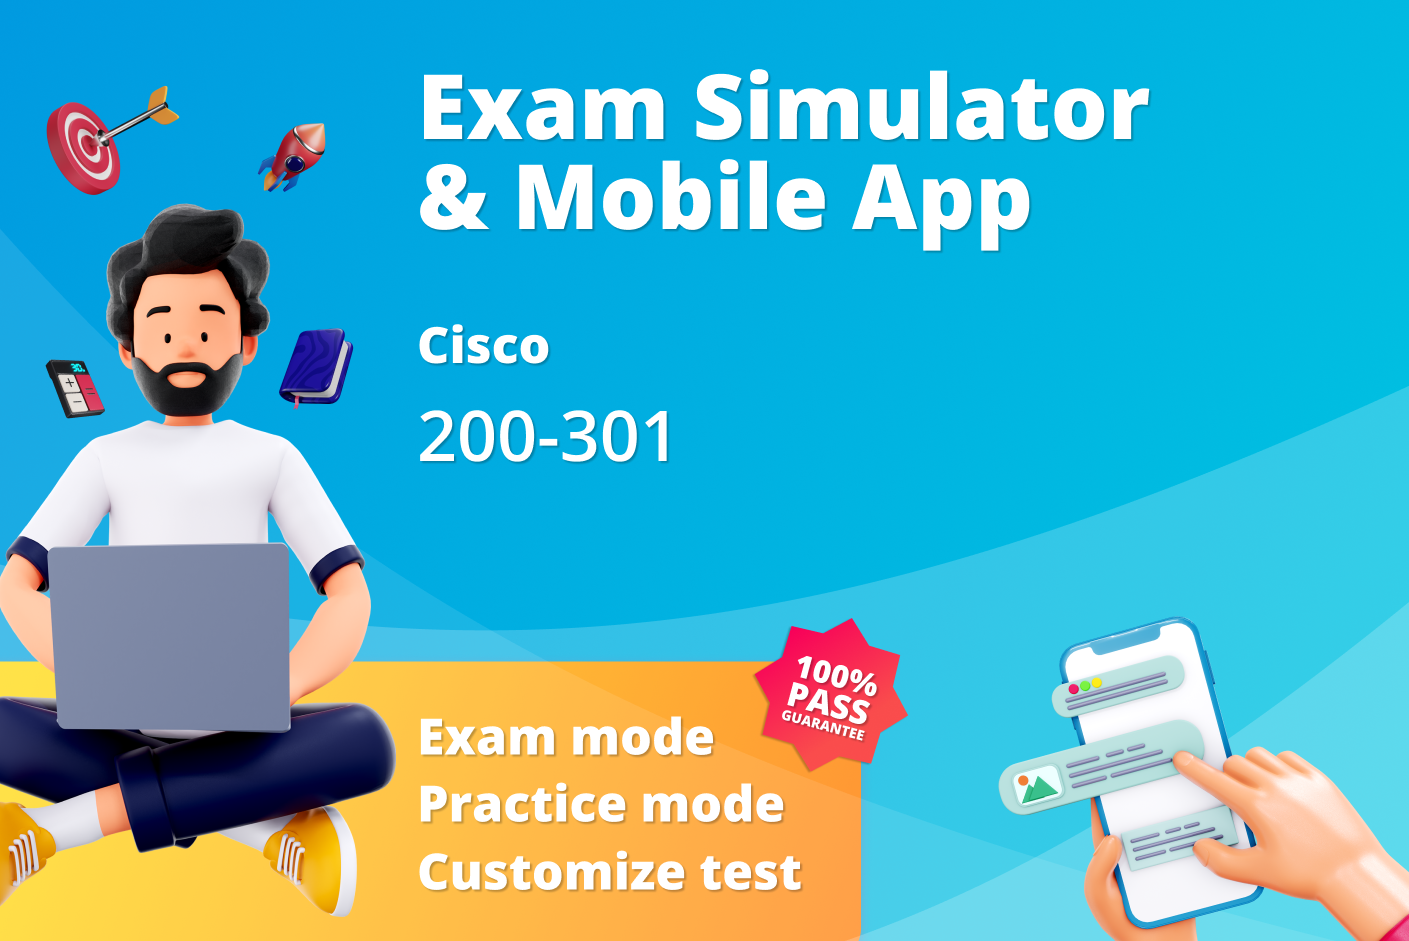 Cisco 200-301 mock exam: Test your skills with our comprehensive practice tests